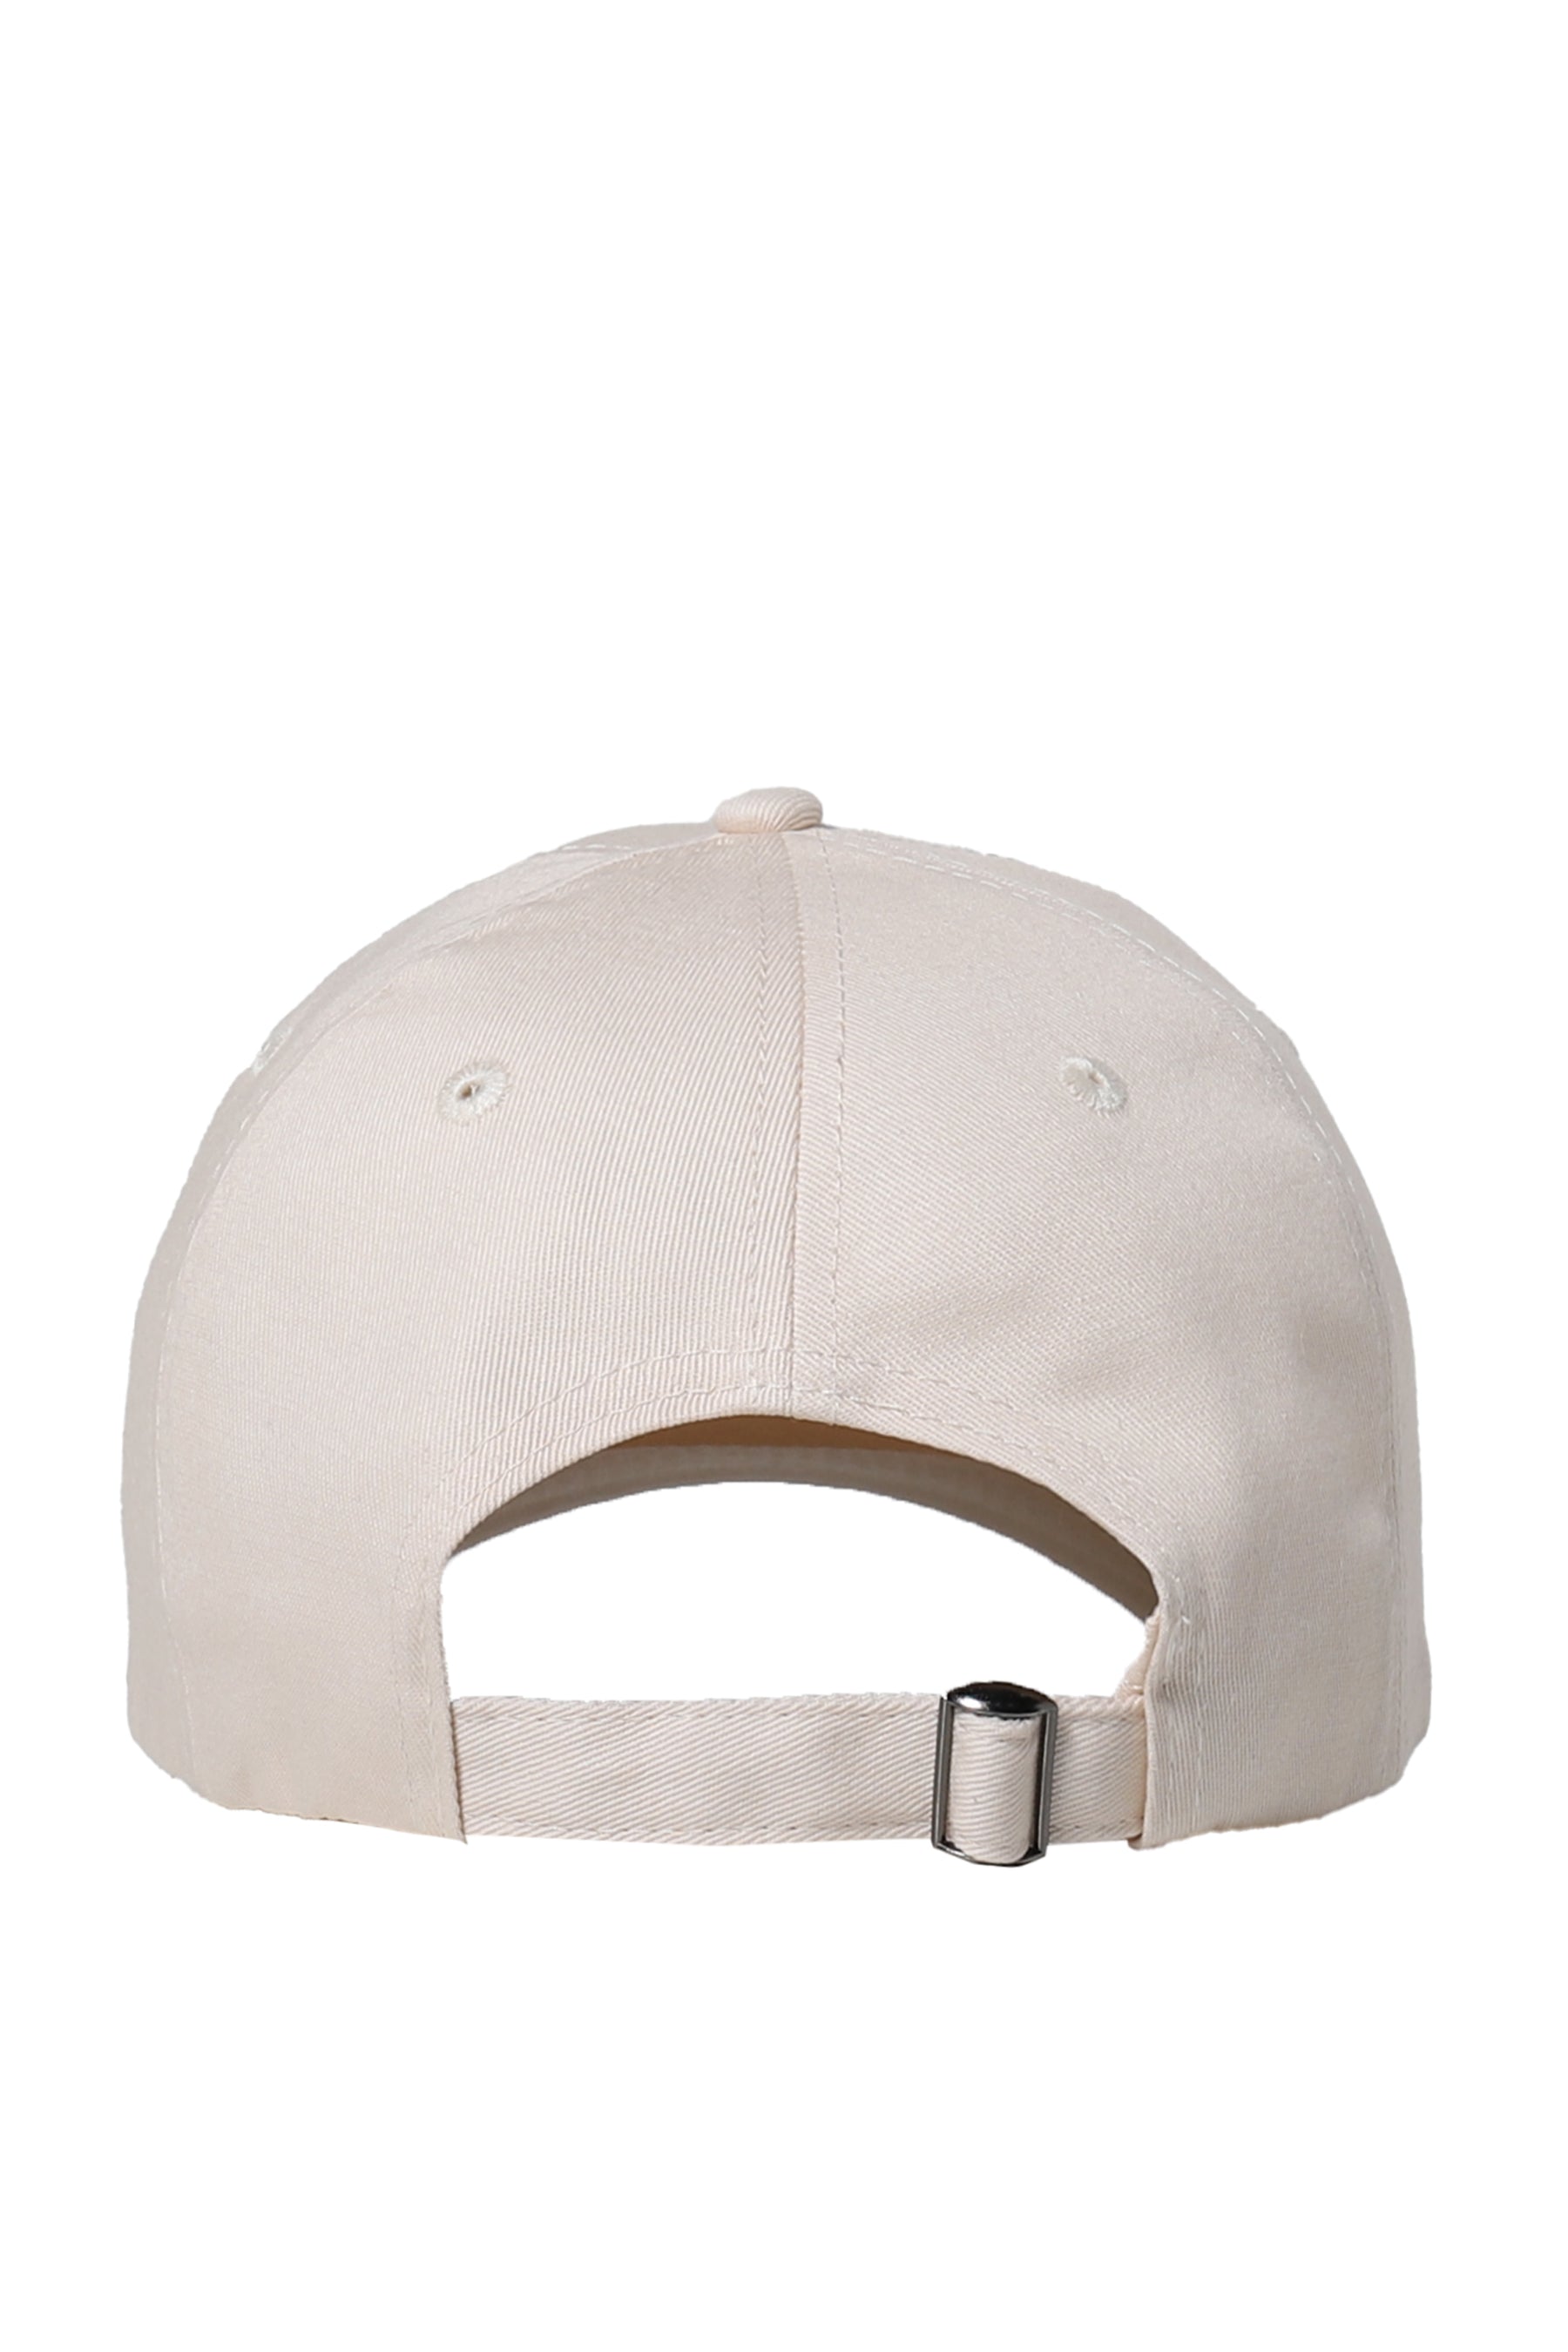 H&W CLUB EMBROIDERED HAT / CRM